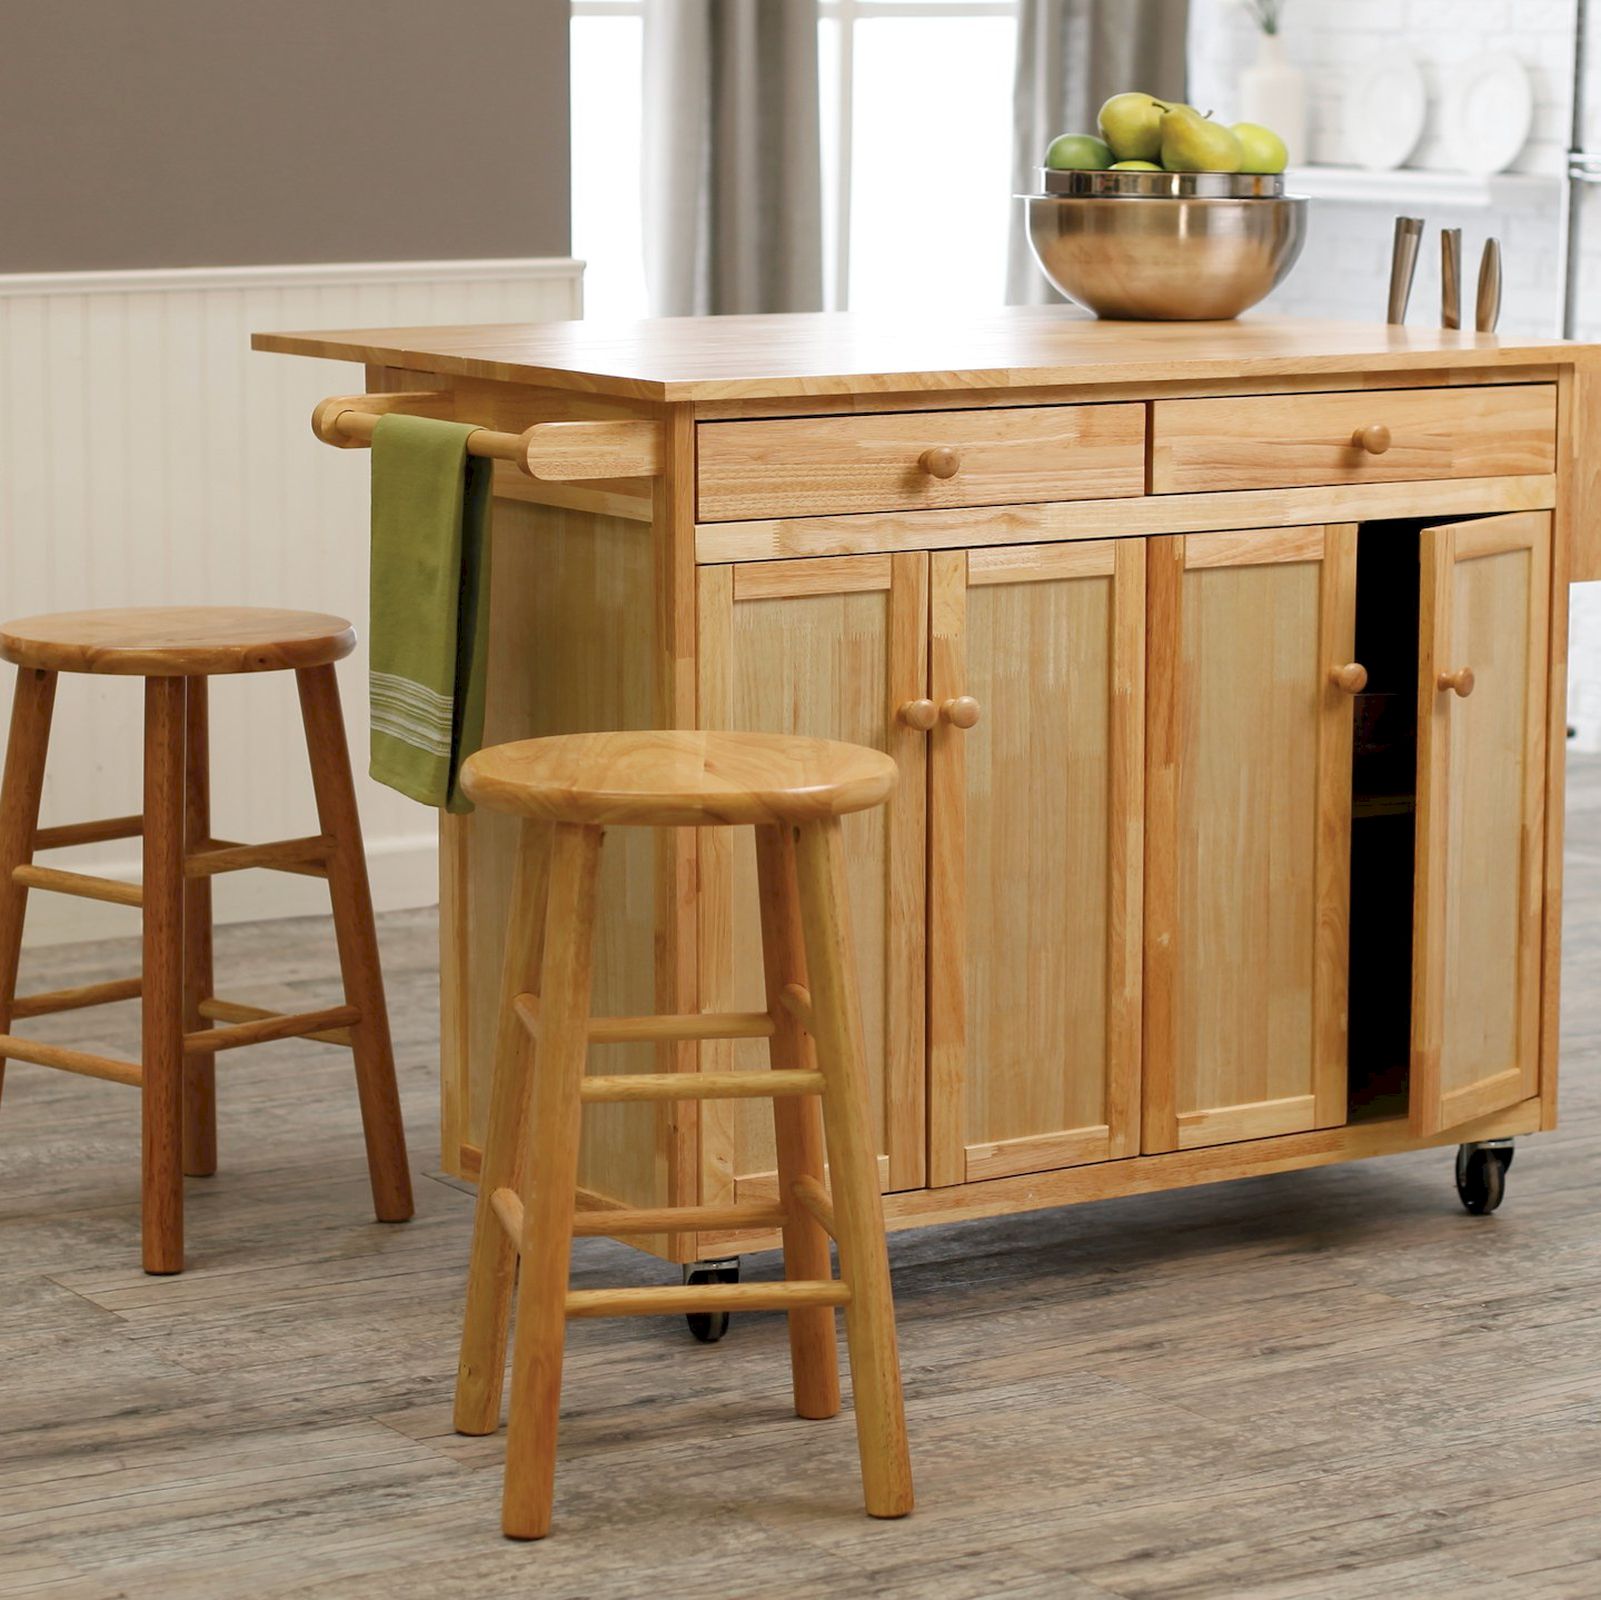 Portable Kitchen Island With Stools